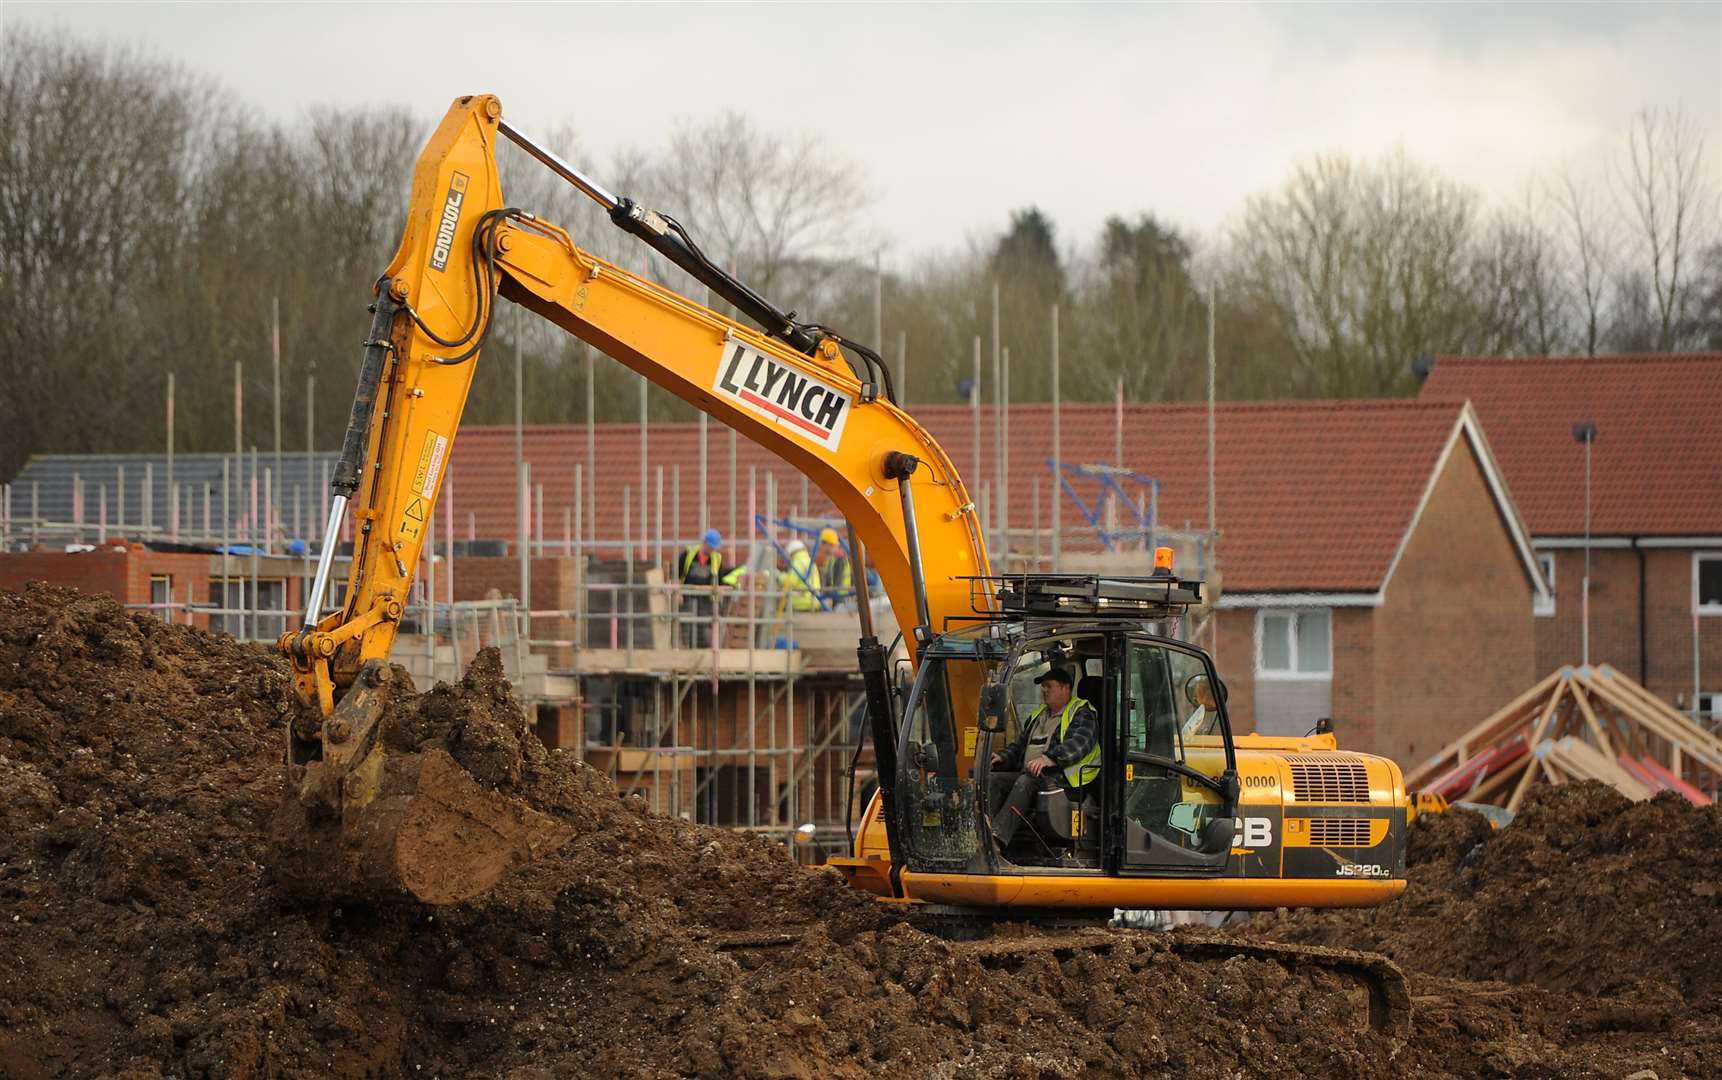 Swale council said it did not have any brownfield housing site schemes which fitted the criteria for government funding